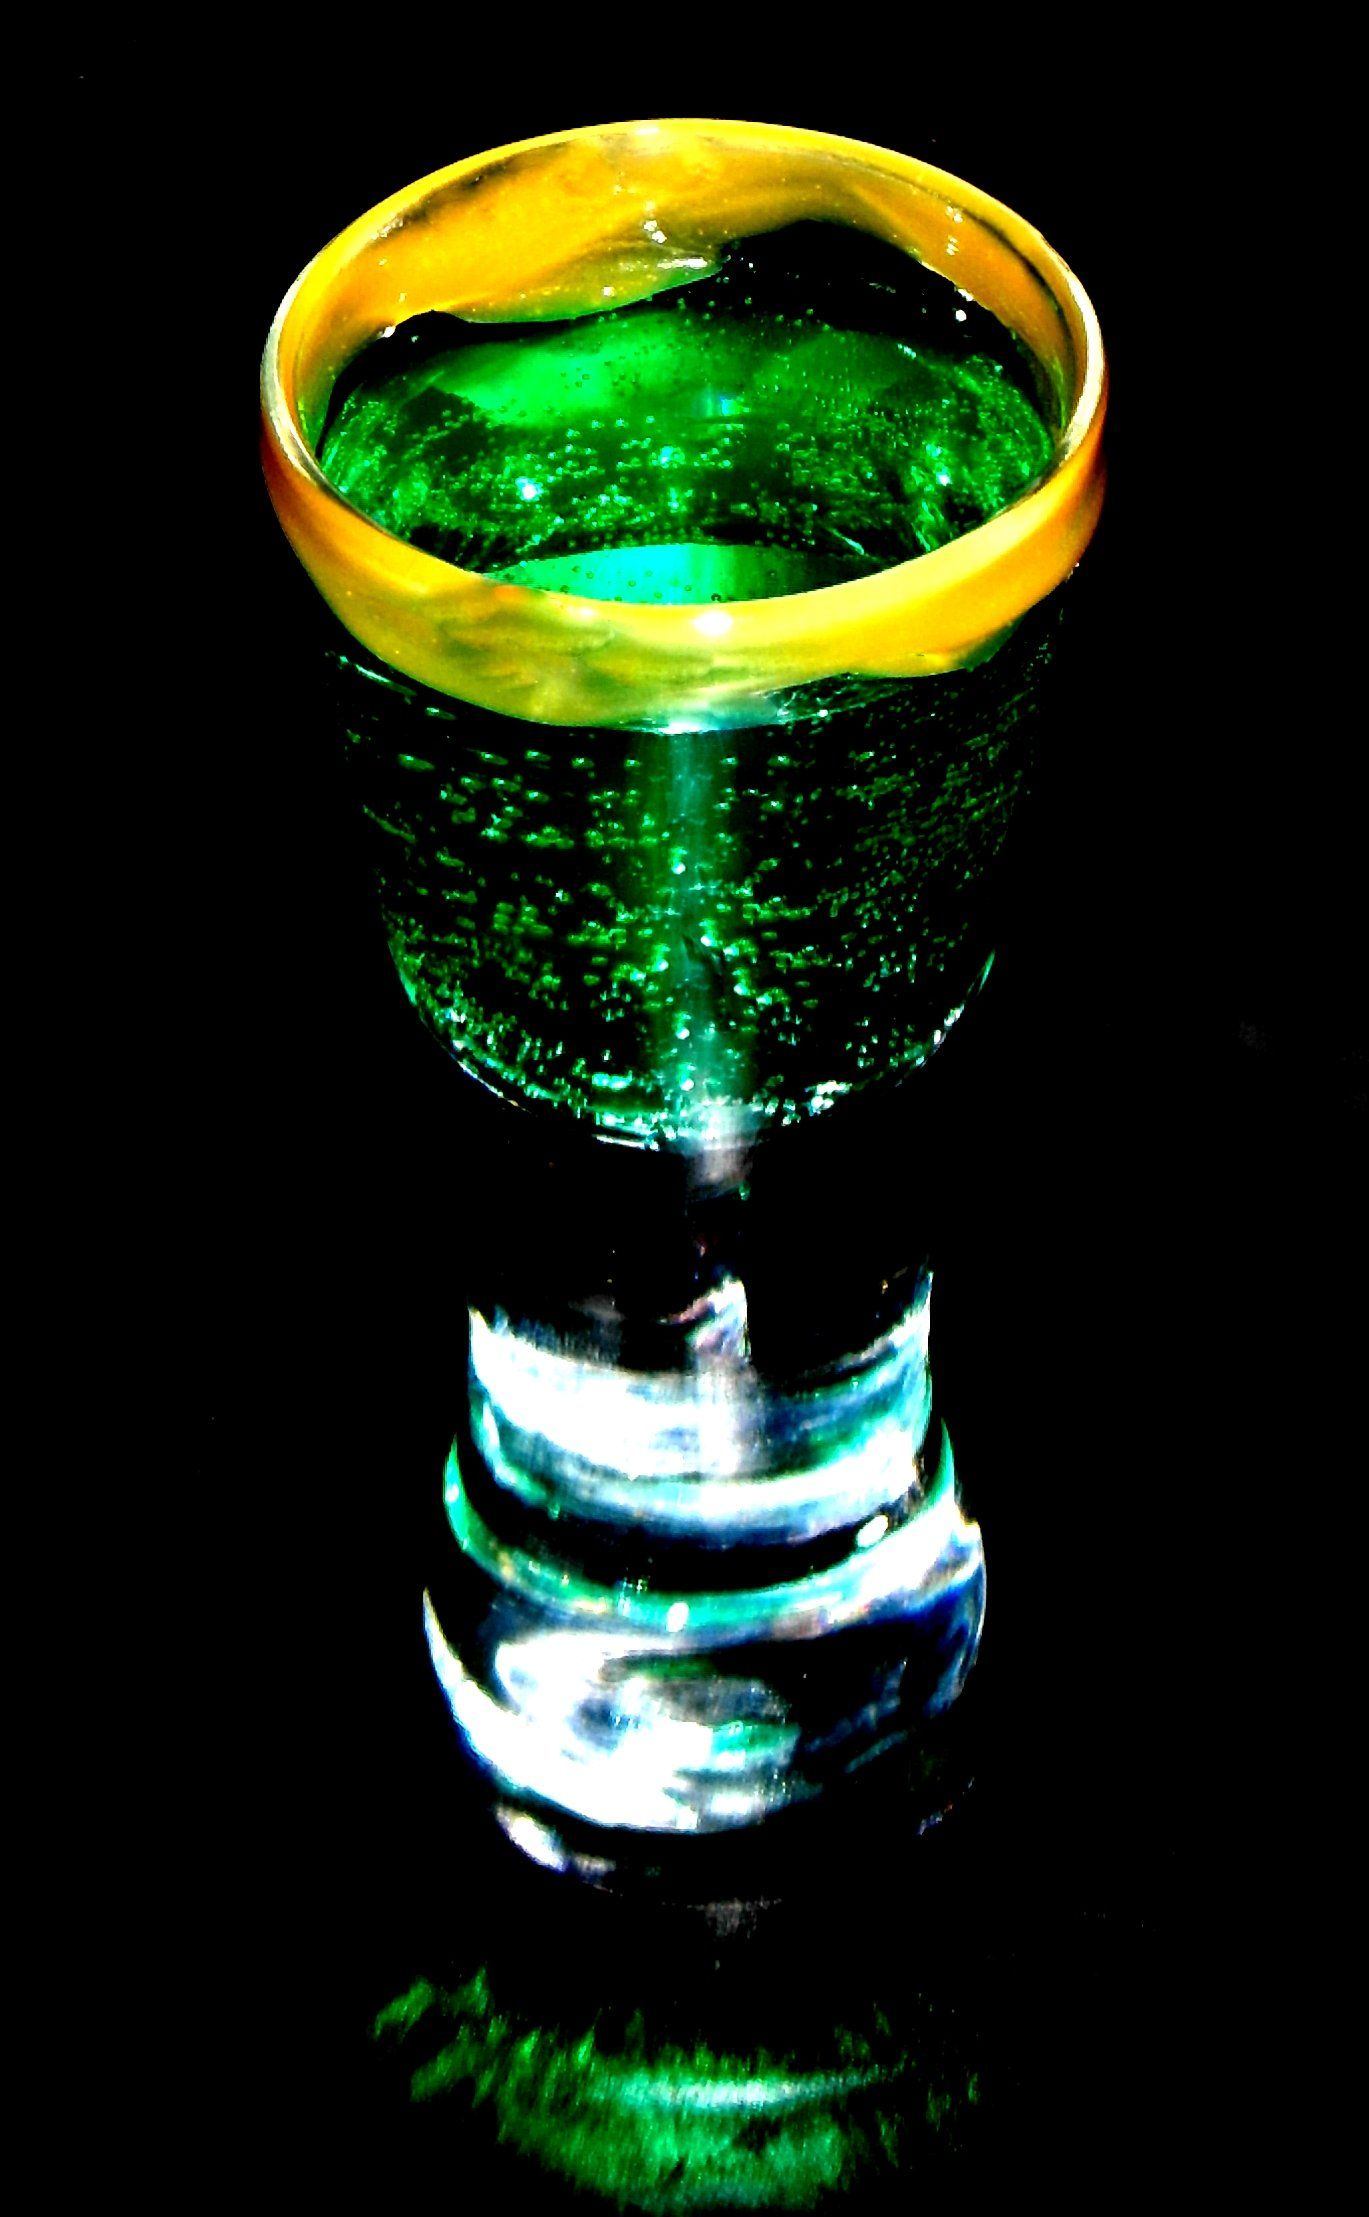 Snow W. reccomend Green alien piss mixed drinks